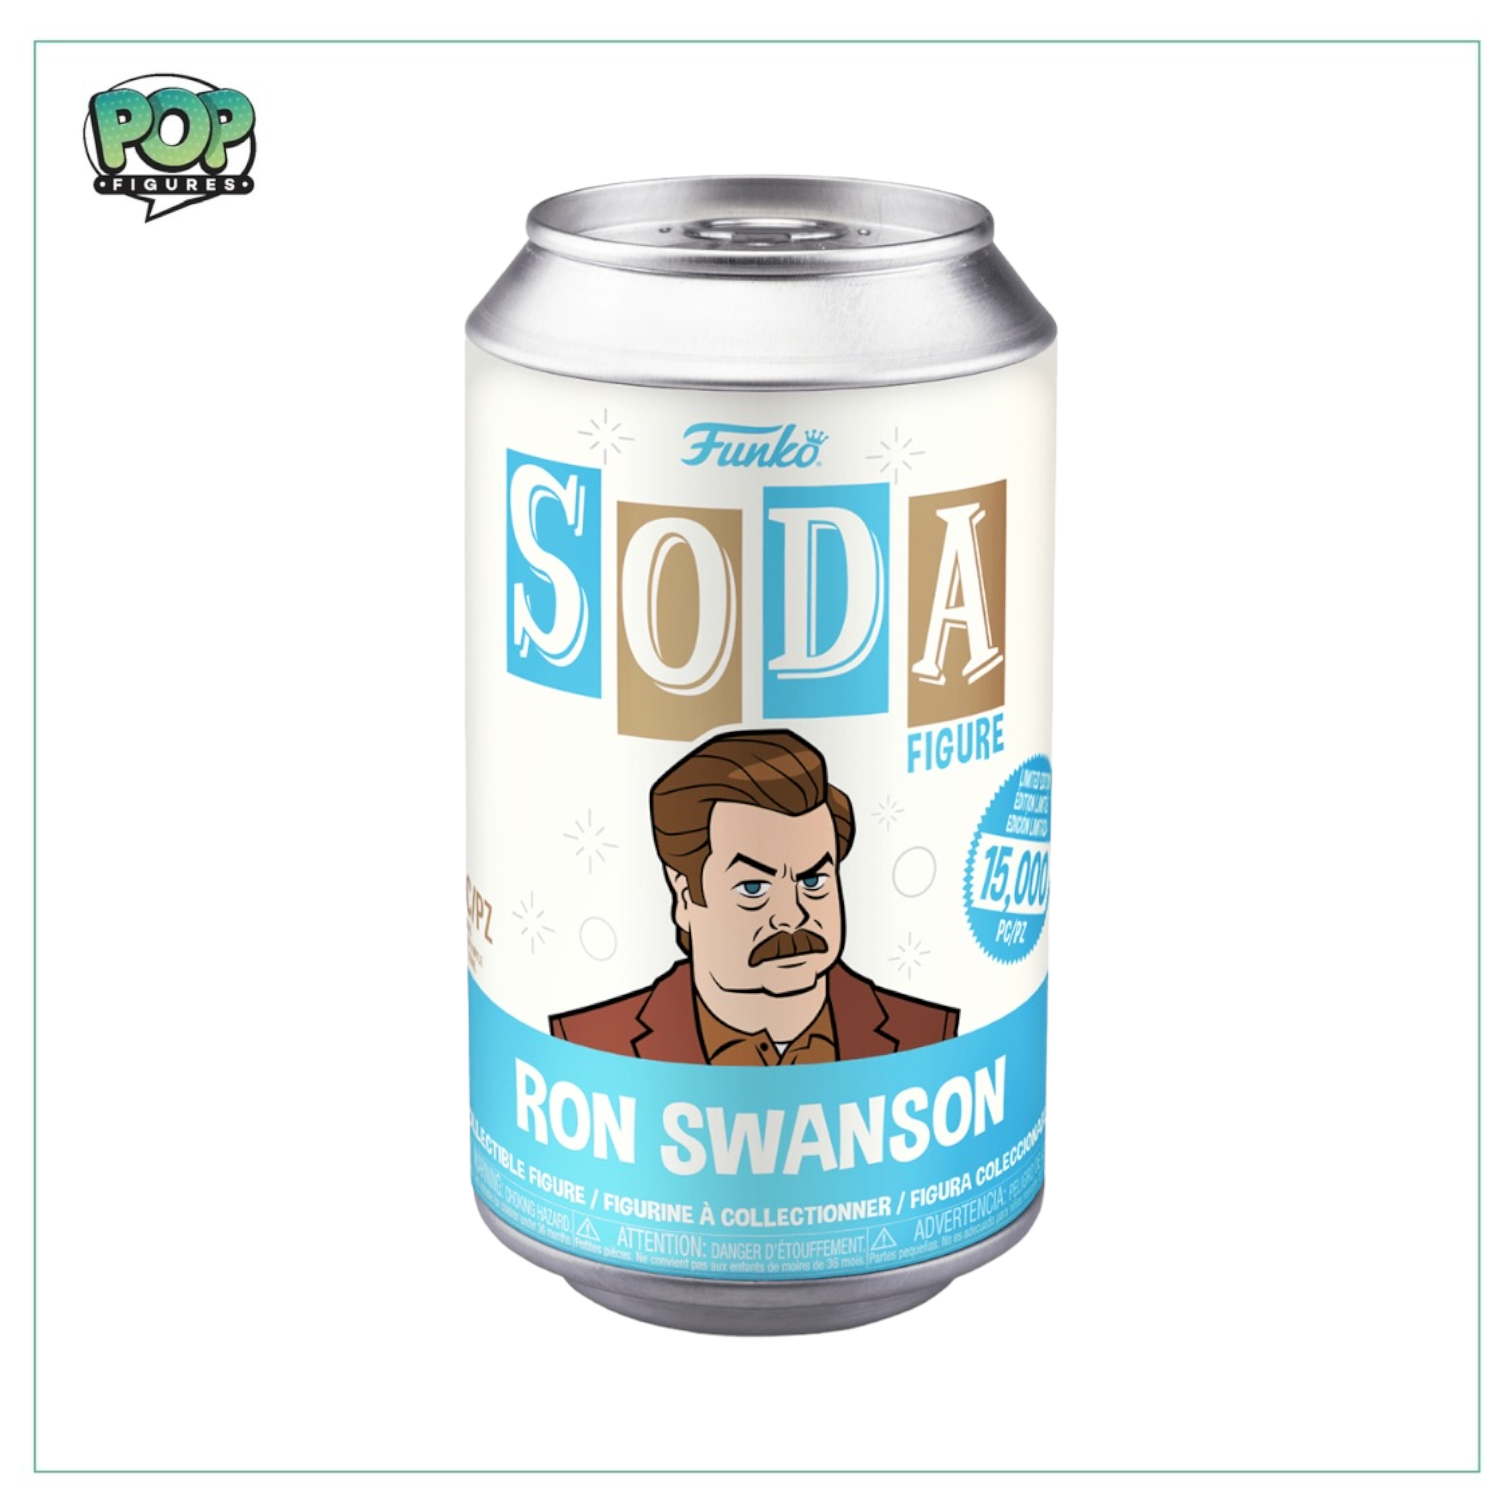 Ron Swanson Funko Soda Vinyl Figure! - Parks and Recreation - LE15000Pcs - Chance Of Chase